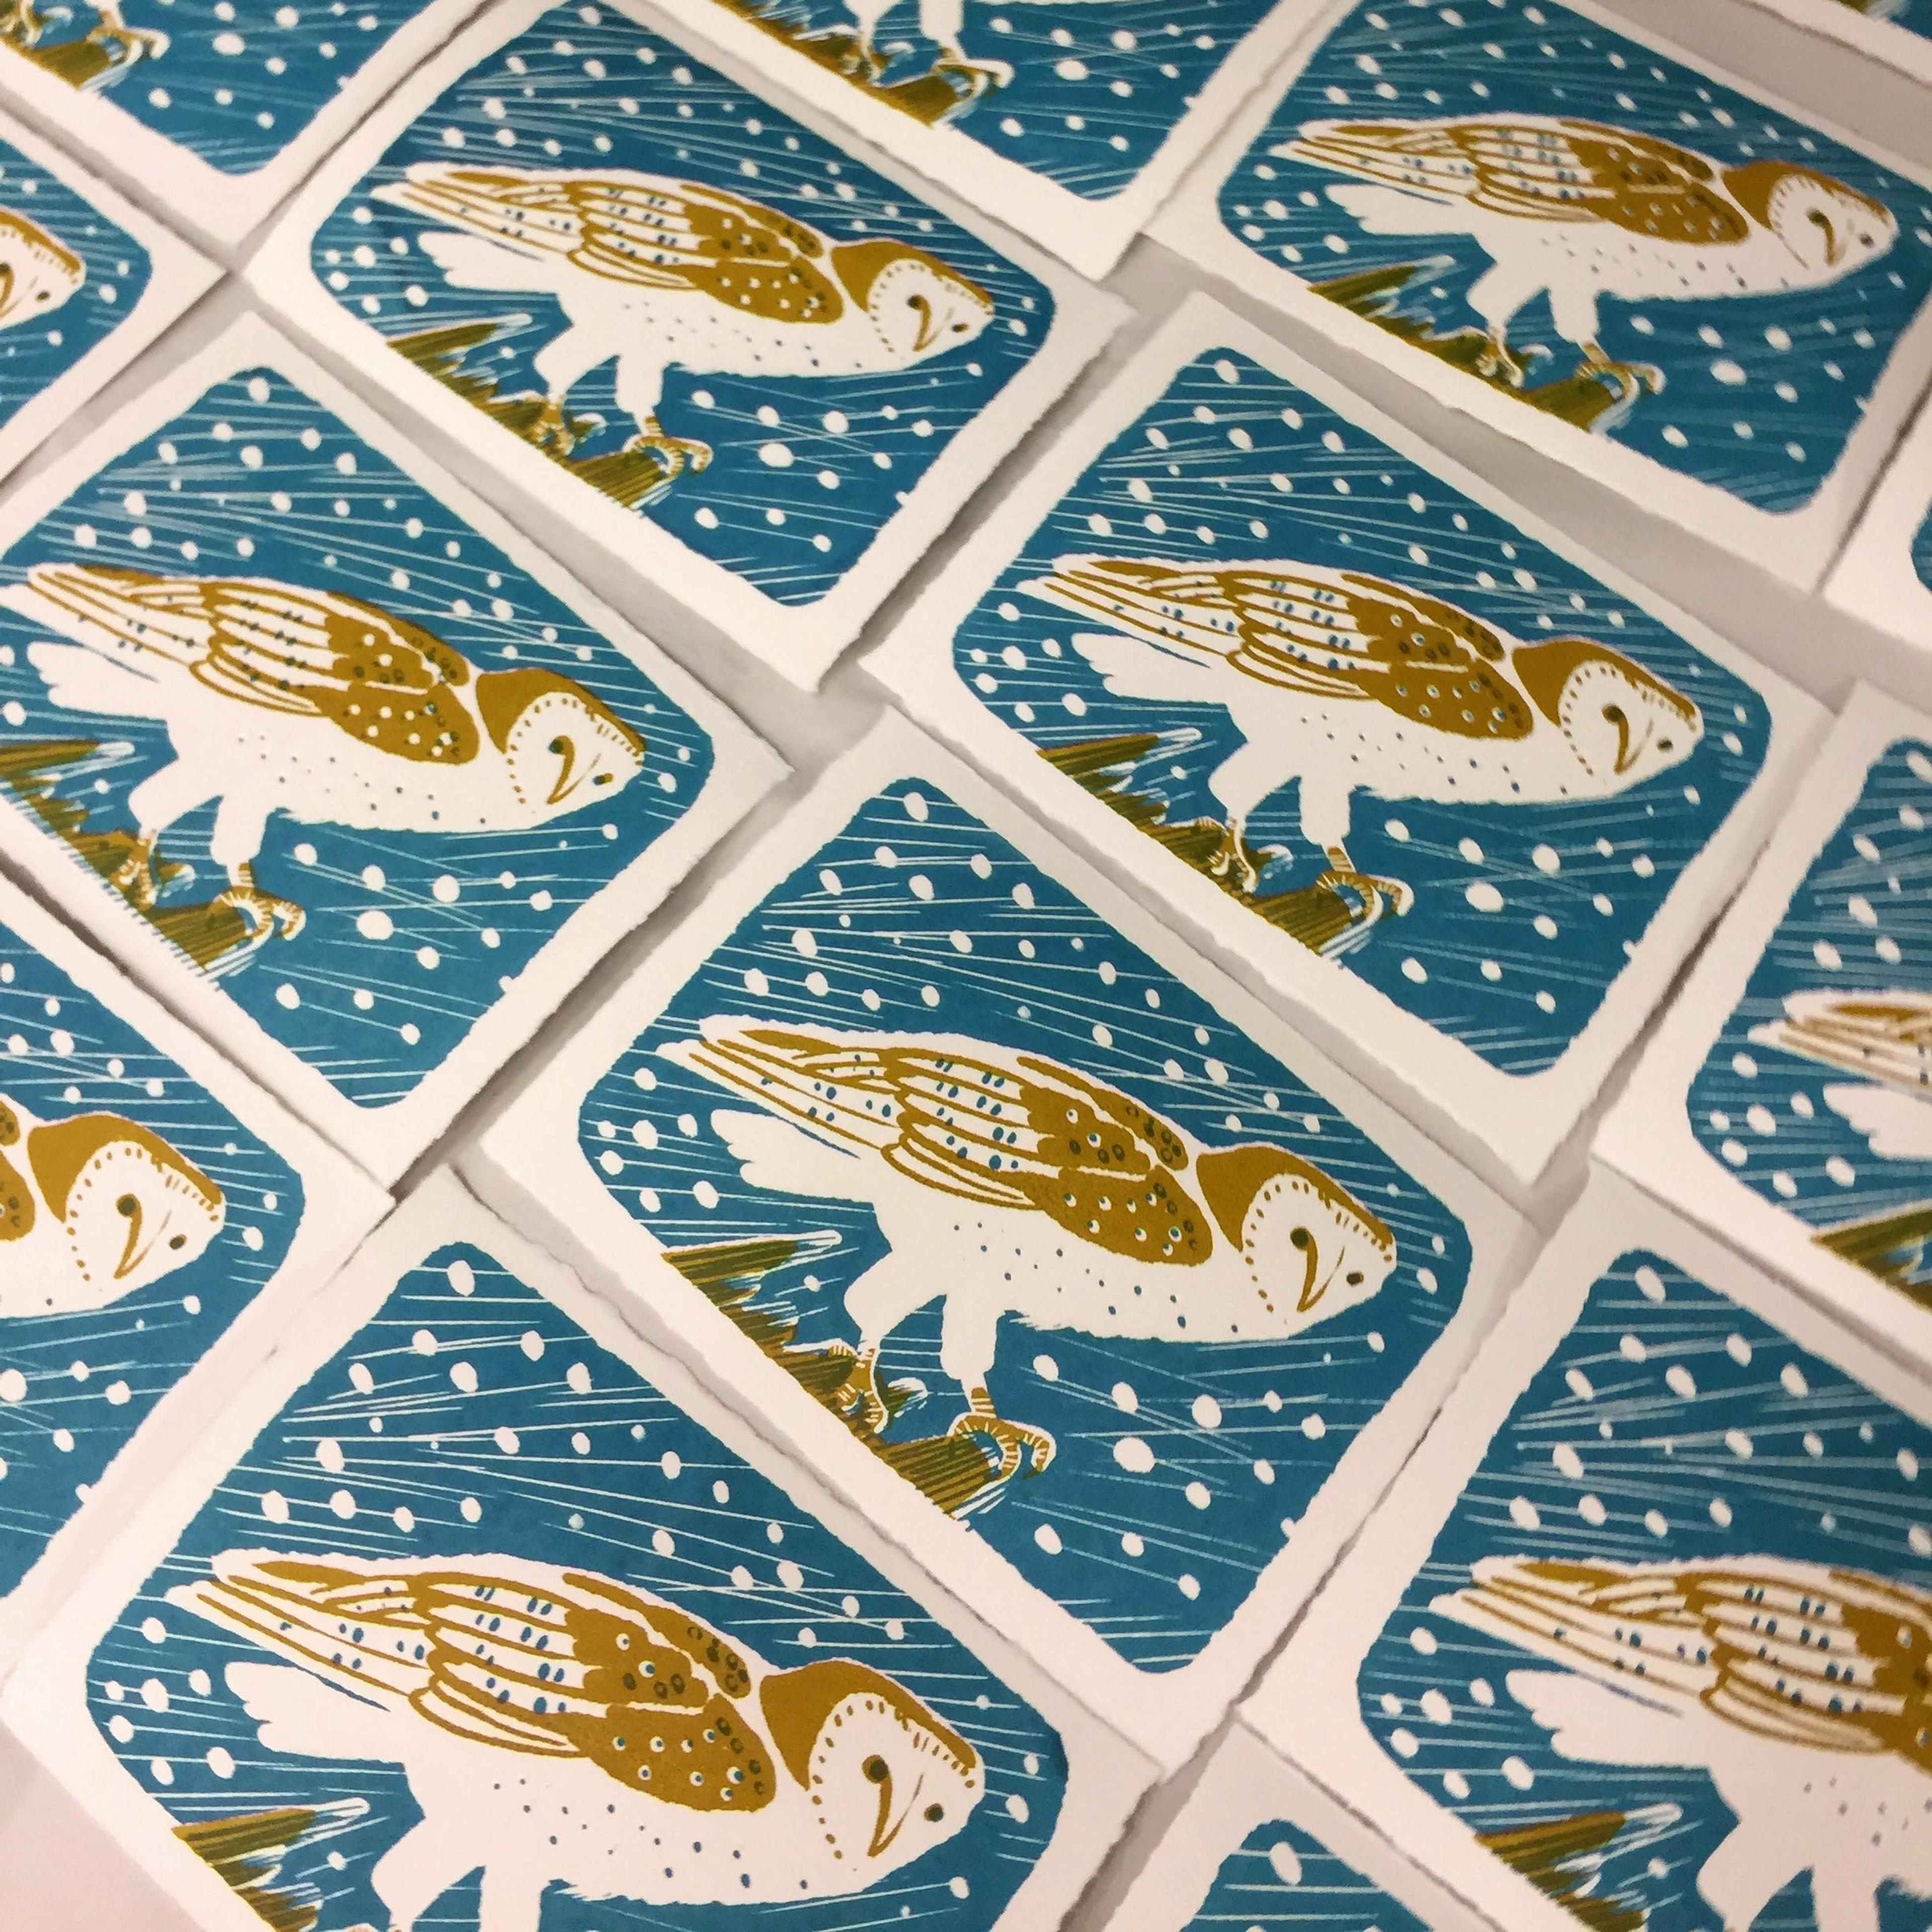 Multiple prints of an owl against a blue background with white spots.